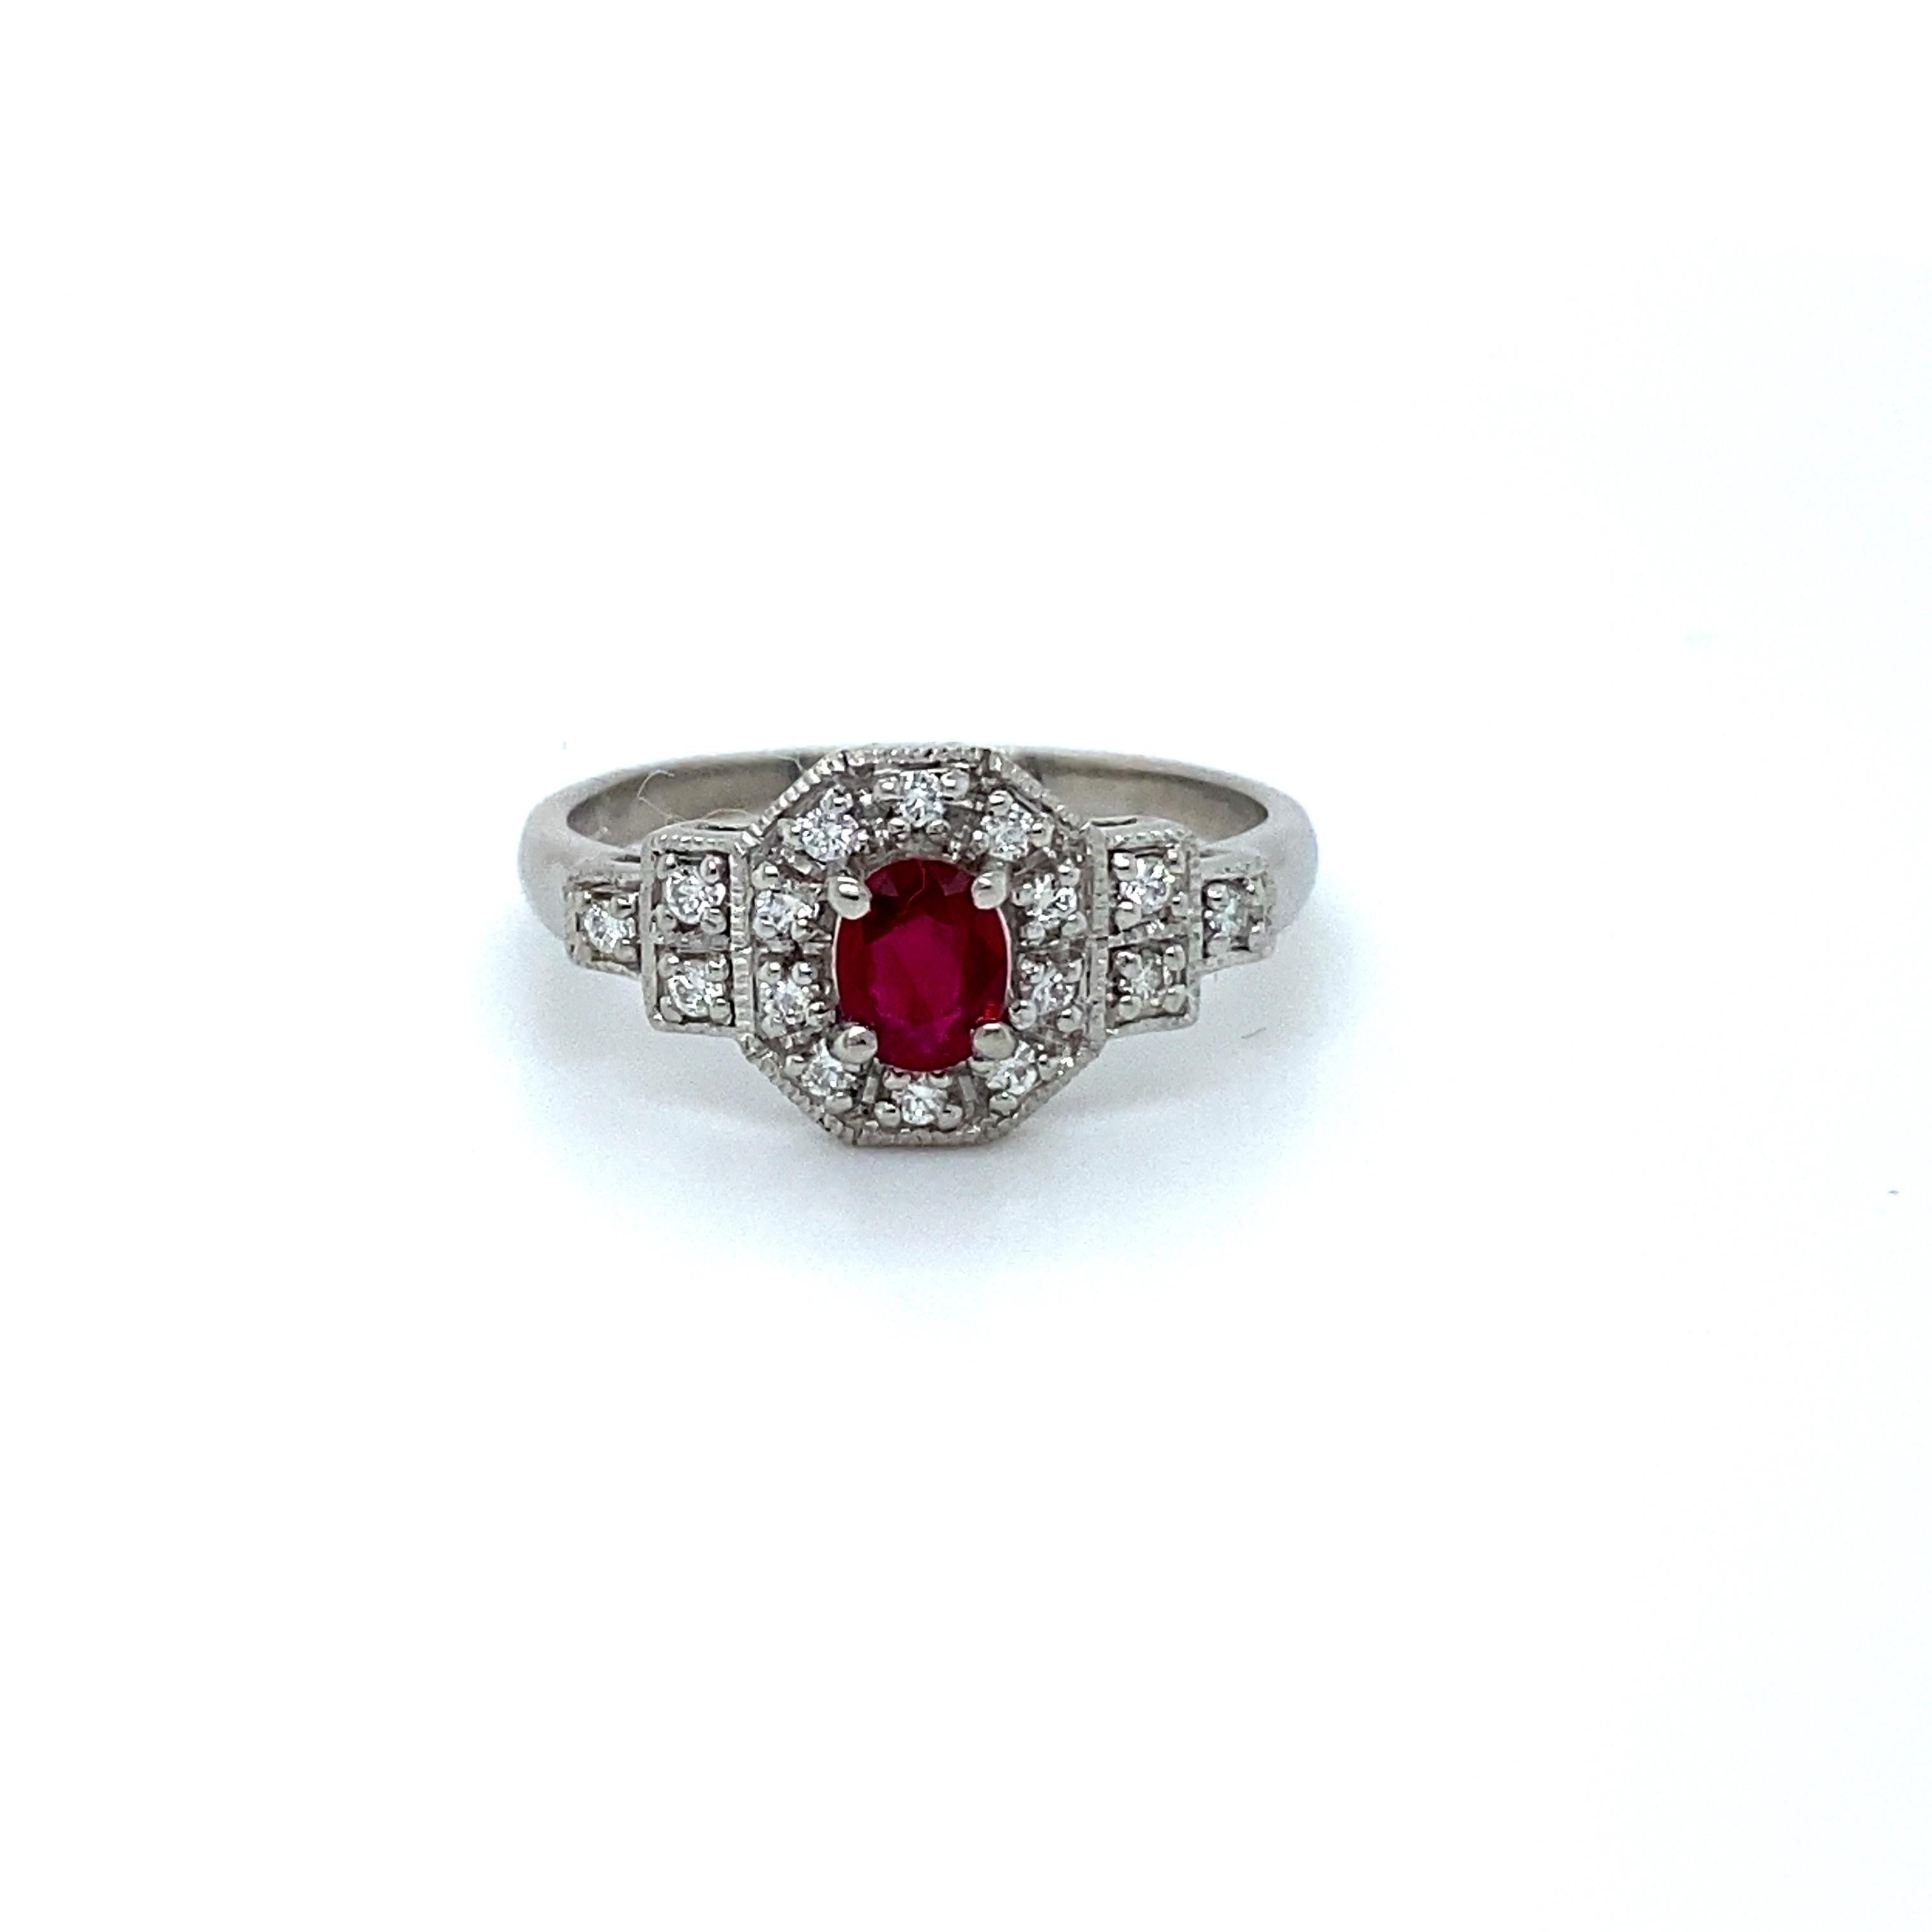 So Pretty! I just love this Art Deco Platinum Diamond and Ruby Engagement Ring! Such a great classic form! Crafted in Platinum, the design features a classic Art Deco cluster look. In the center, the ring features One Oval Cut Natural Ruby,